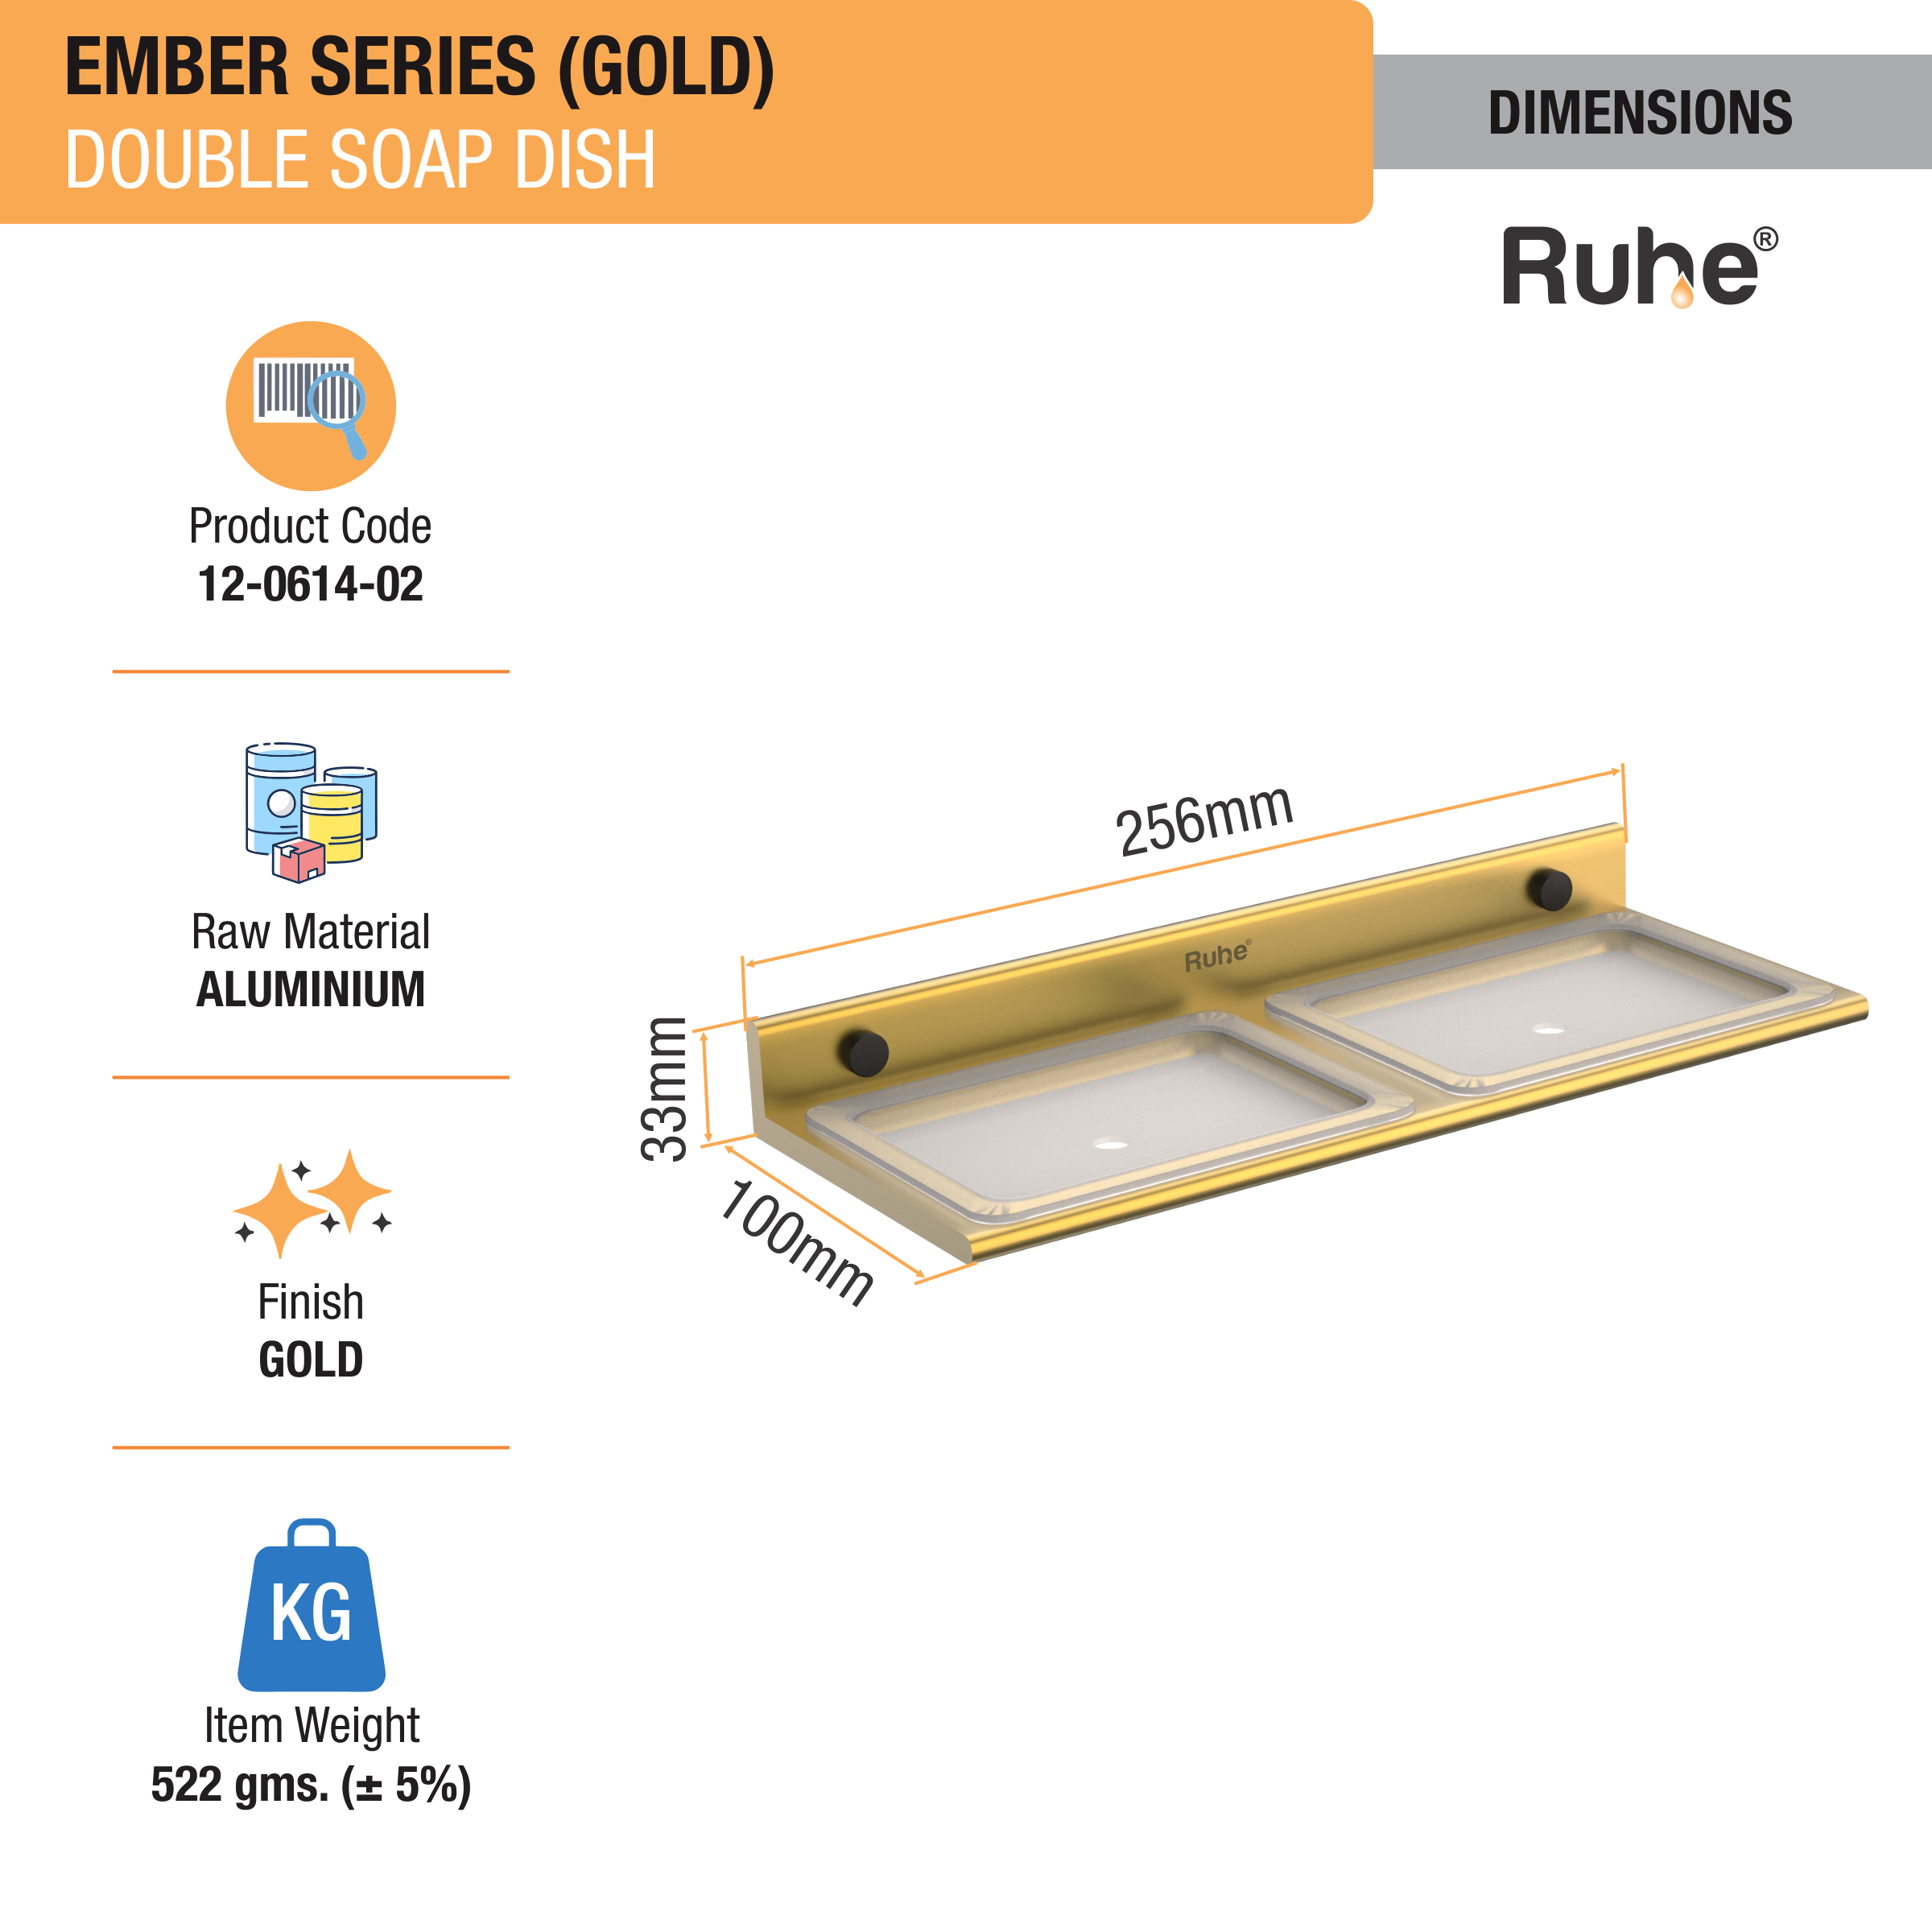 Ember Gold Double Soap Dish (Space Aluminium) dimensions and sizes